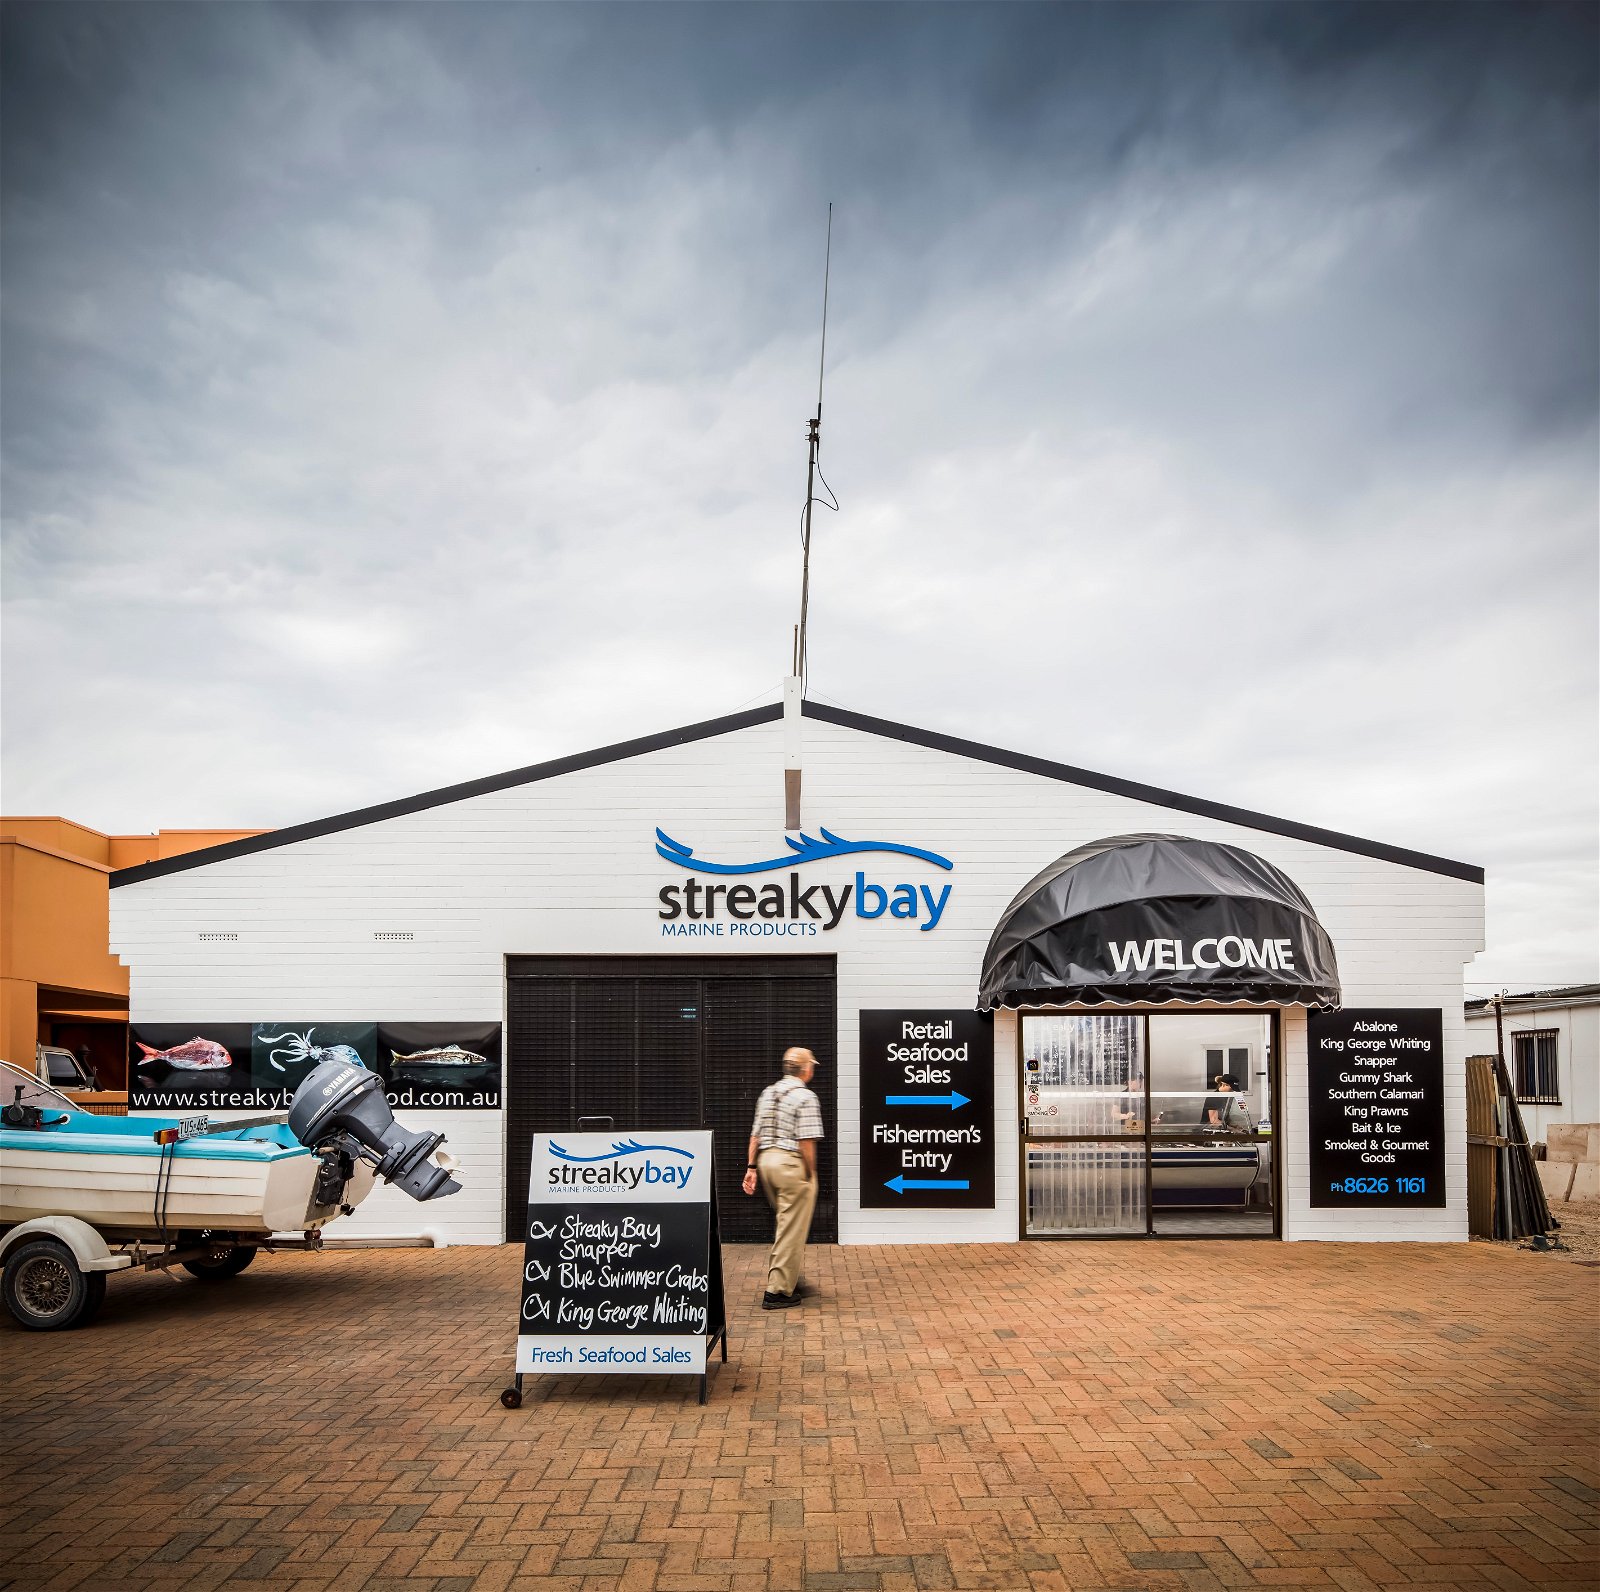 Streaky Bay Marine Products - New South Wales Tourism 